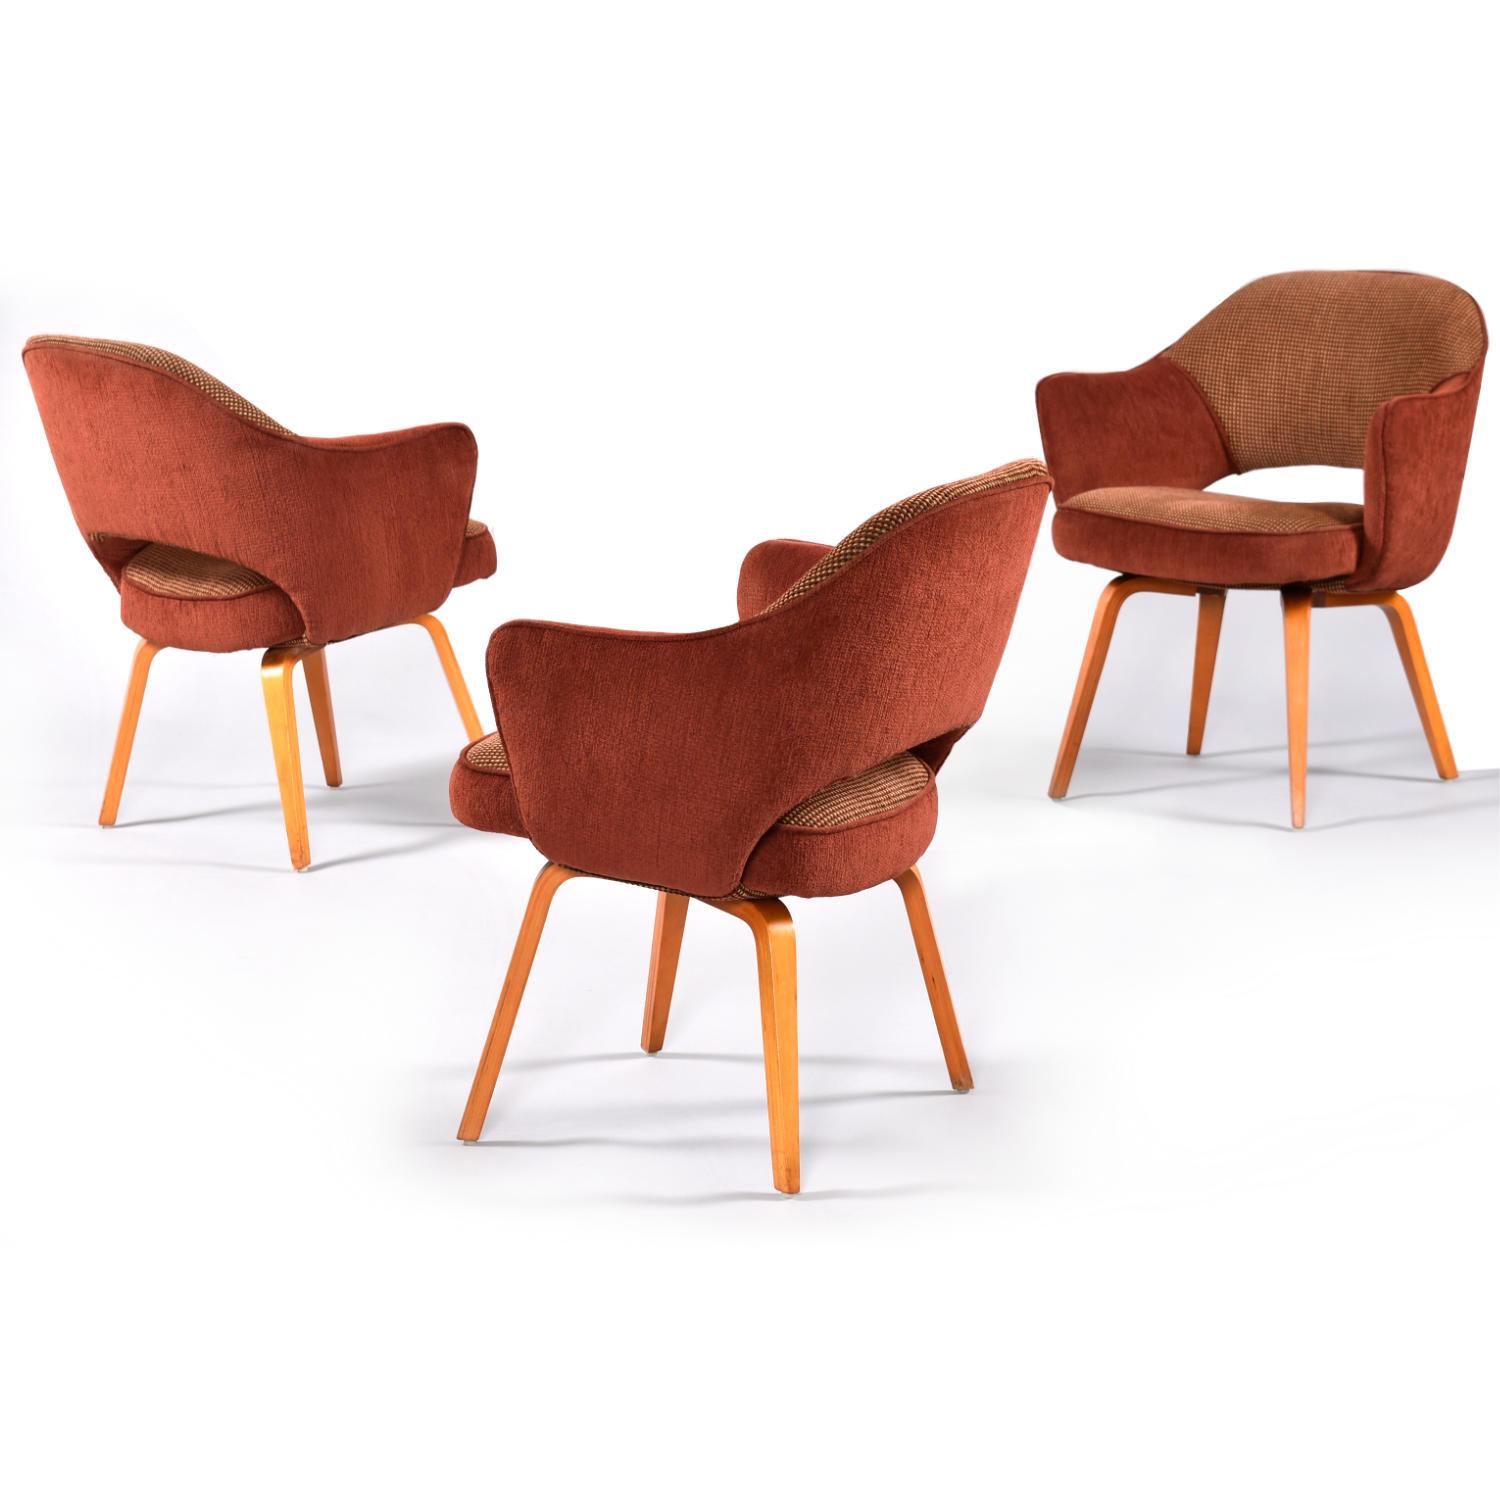 American Restored Set of Six Saarinen for Knoll Executive Armchairs with Wood Legs